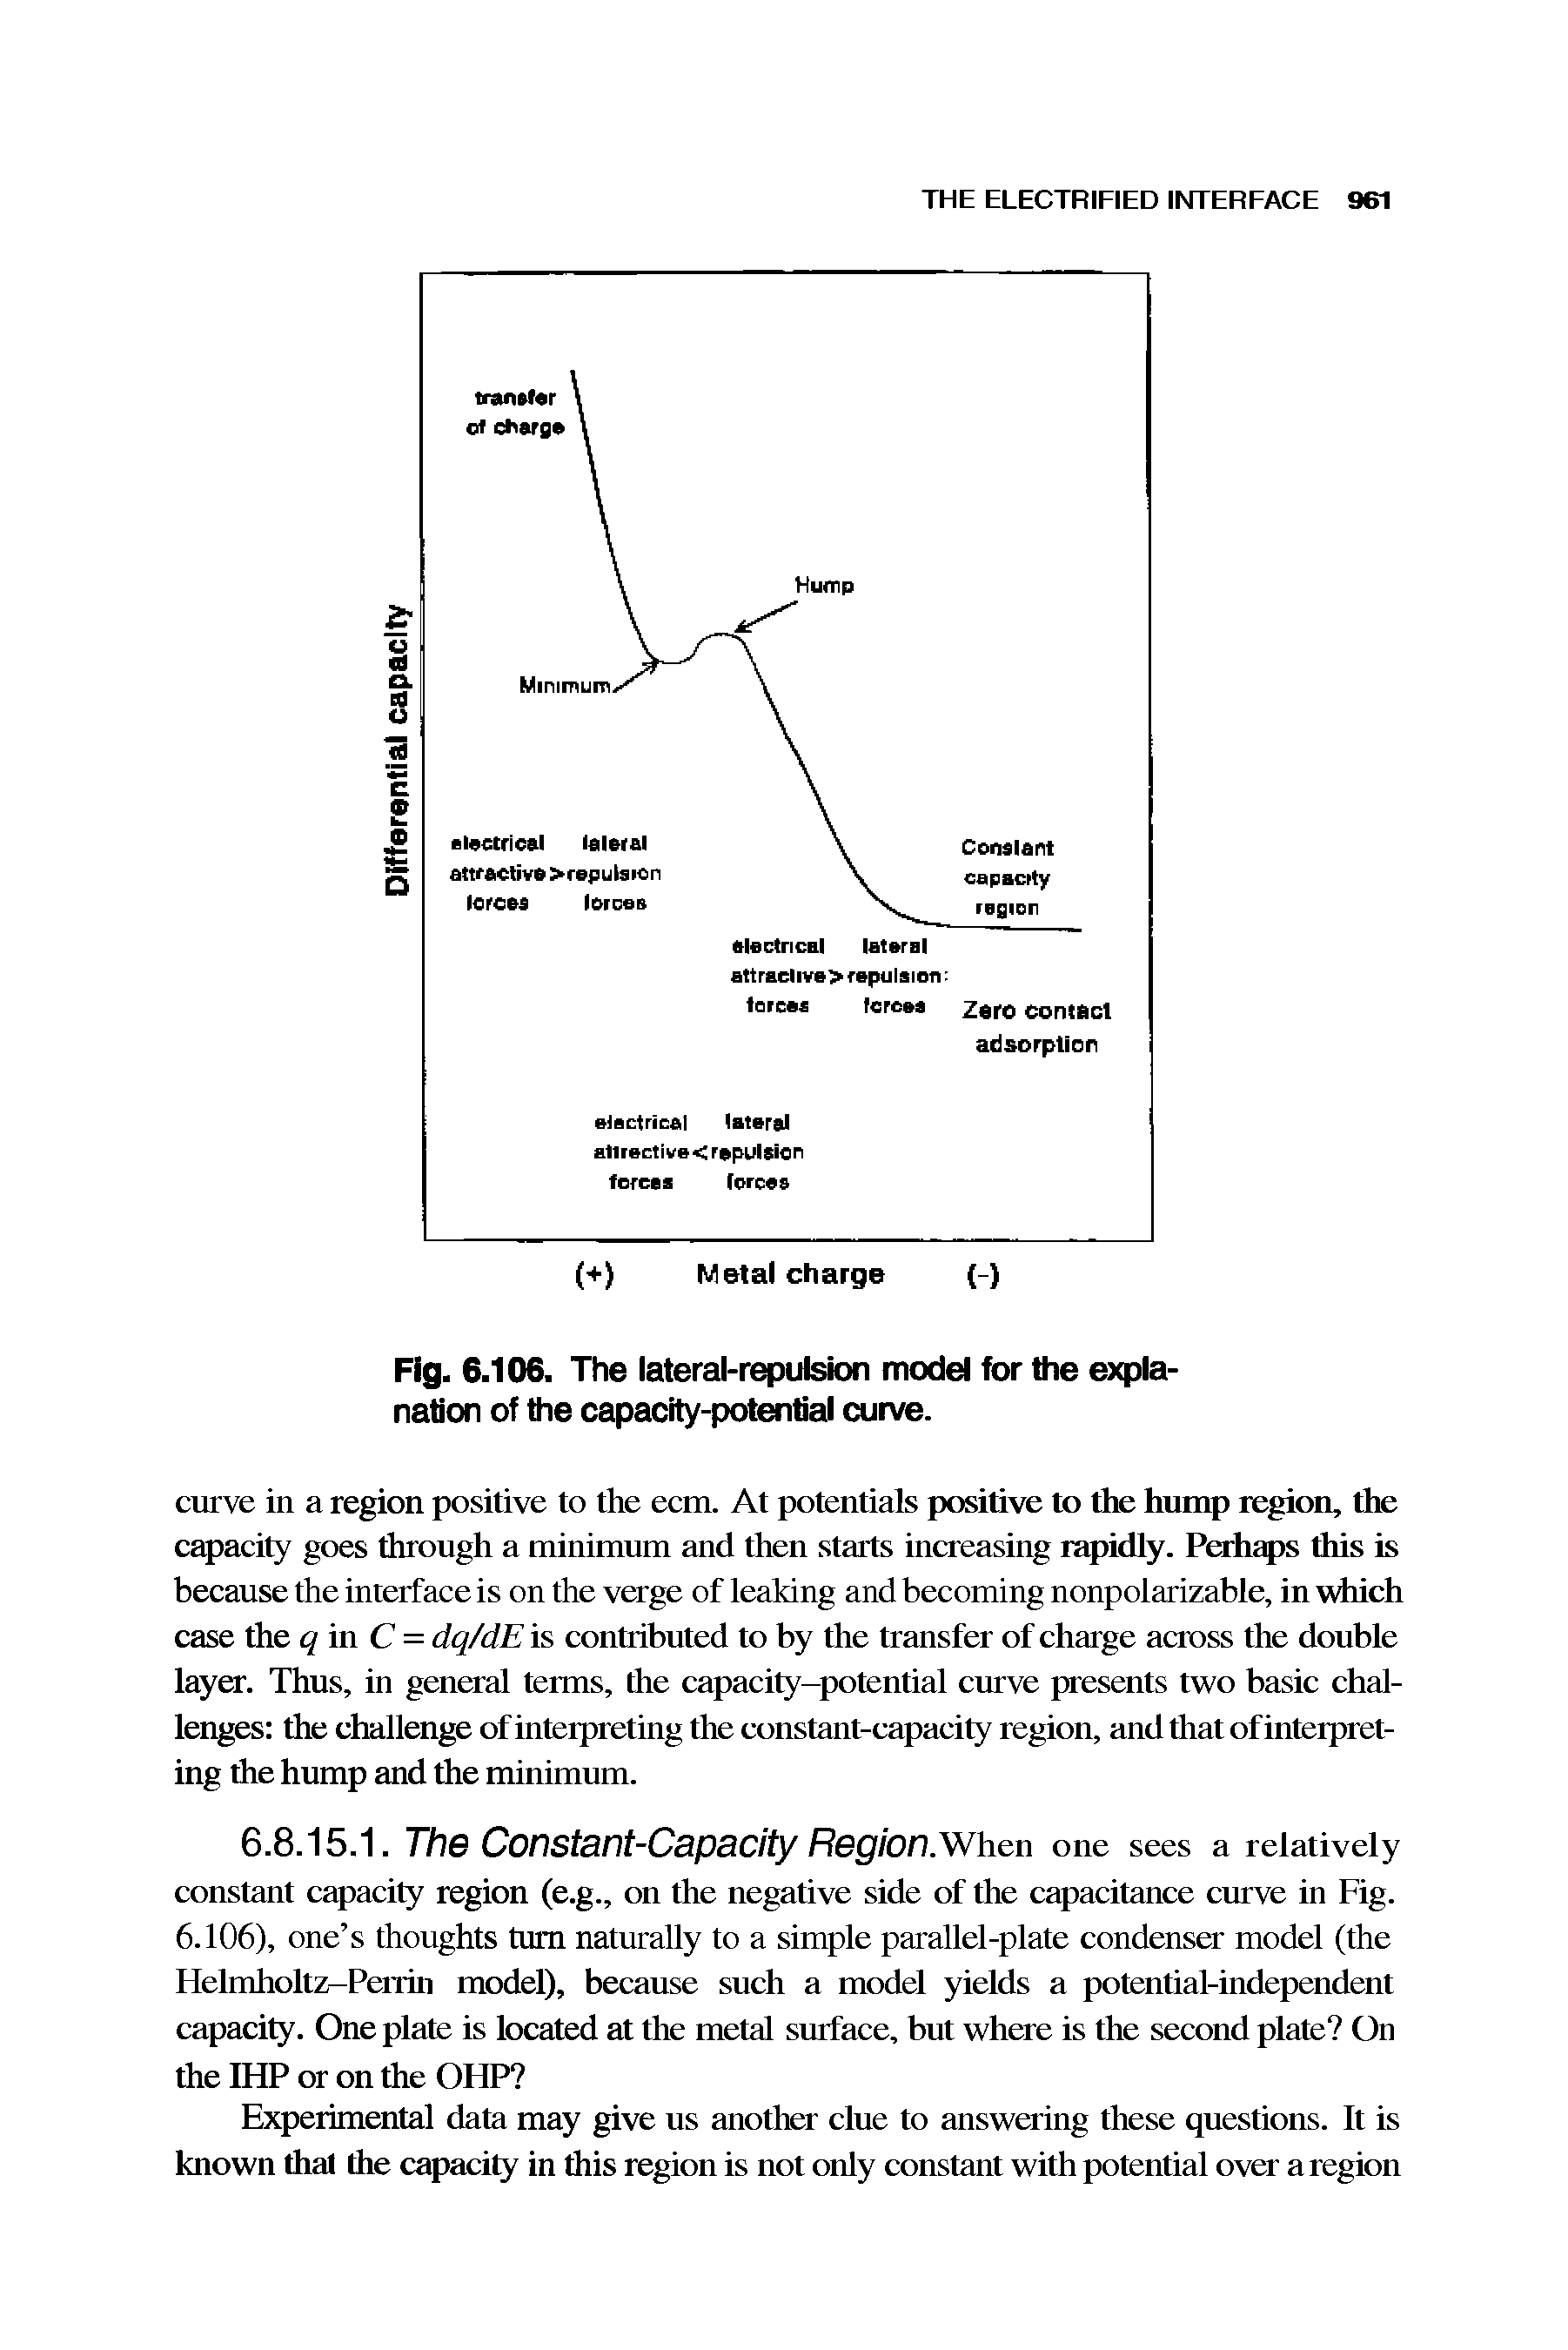 Fig. 6.106. The lateral-repulsion model for the explanation of the capacity-potential curve.